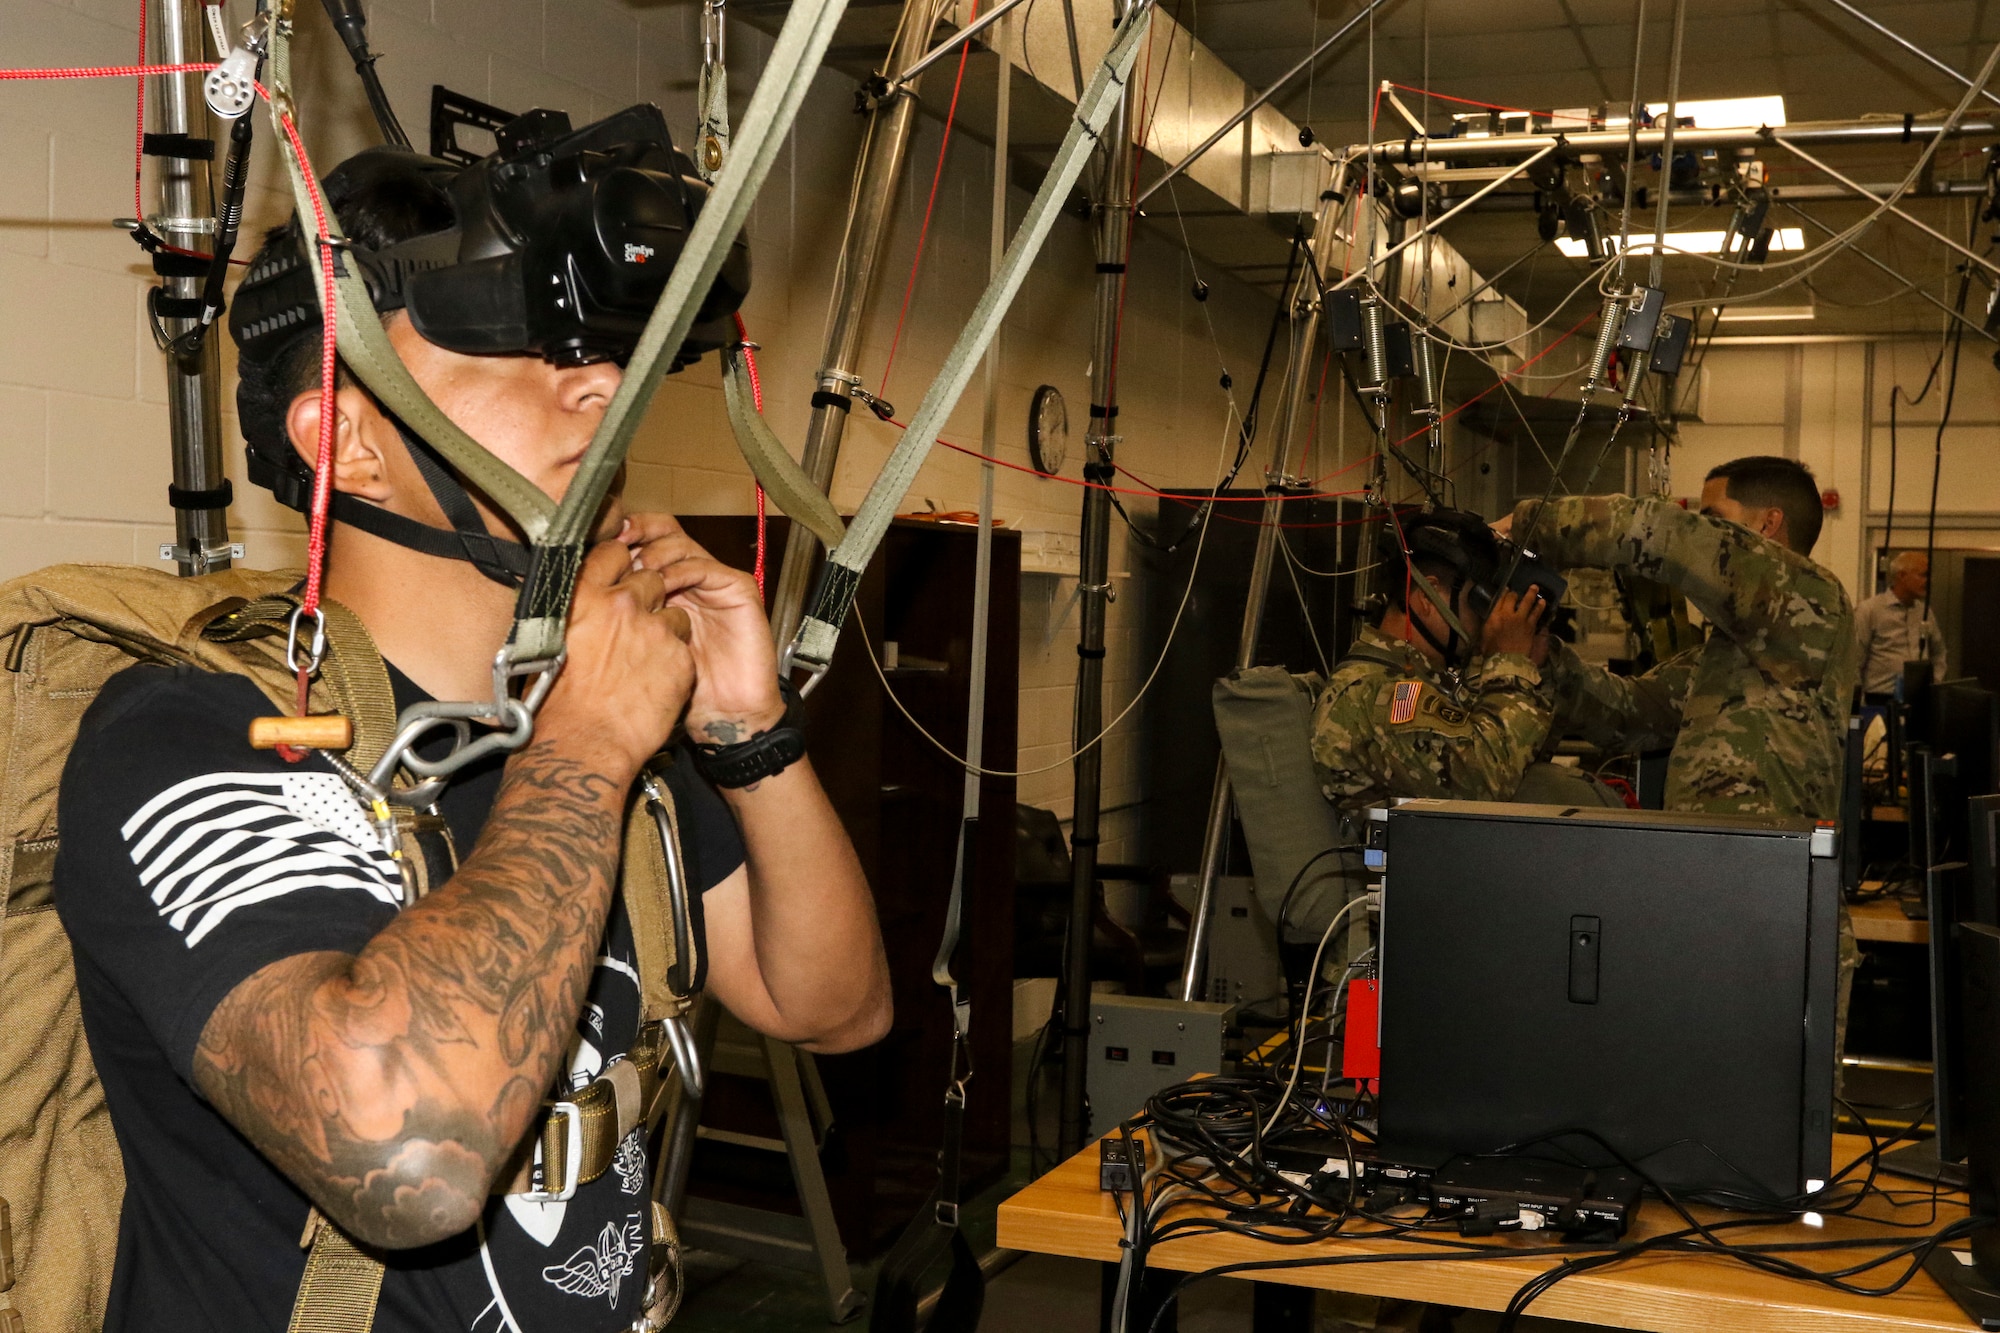 A paratrooper prepares for a virtual reality jump training on the new Parachute Simulator (PARASIM) 7 at the Joint Riggers Facility, MacDill Air Force Base, Tampa, Fla., Feb. 21, 2019. The PARASIM 7 recreates the experience of a real parachute jump from the head-mounted 3D virtual reality display to the suspension harness that detects jumper inputs. The physics-based parachute simulation technology recreates the conditions of a live jump using real-world scenes, malfunctions, wind profiles, various weather conditions and a full library of terrain types. (U.S. Army photo by Staff Sgt. Steven Colvin)